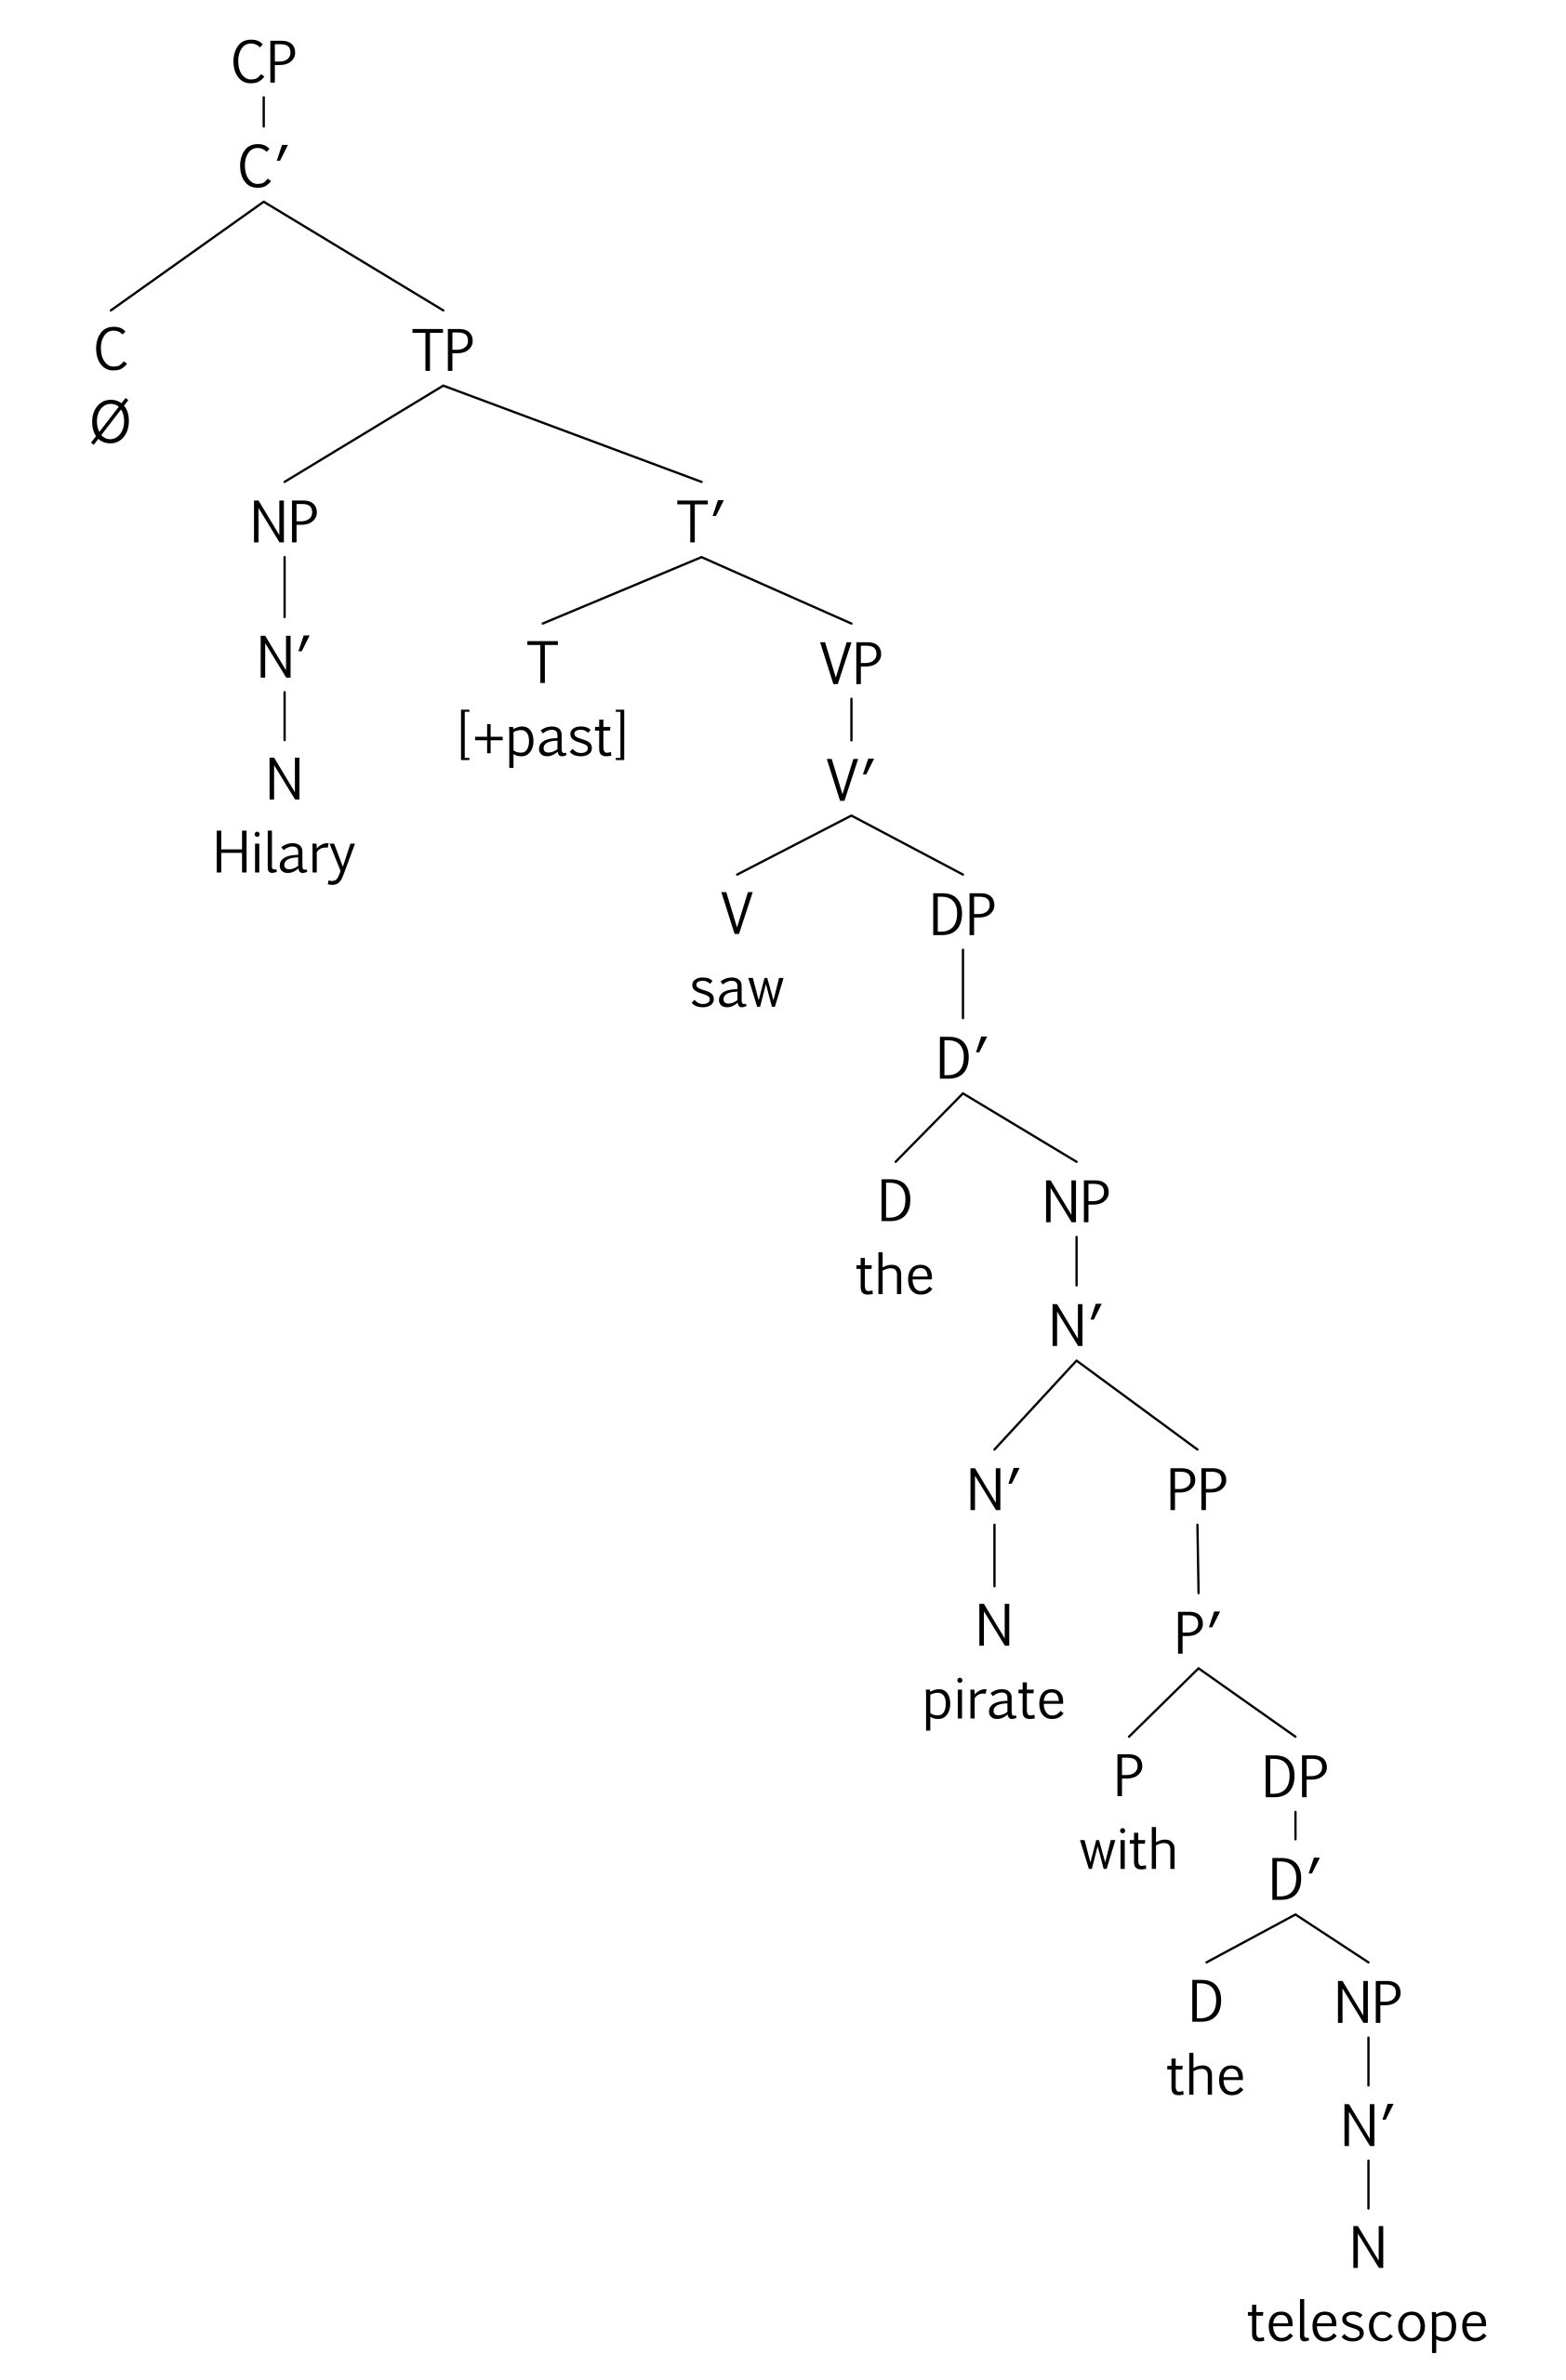 tree diagram: PP [with the telescope] is adjoined to N' headed by N [pirate]